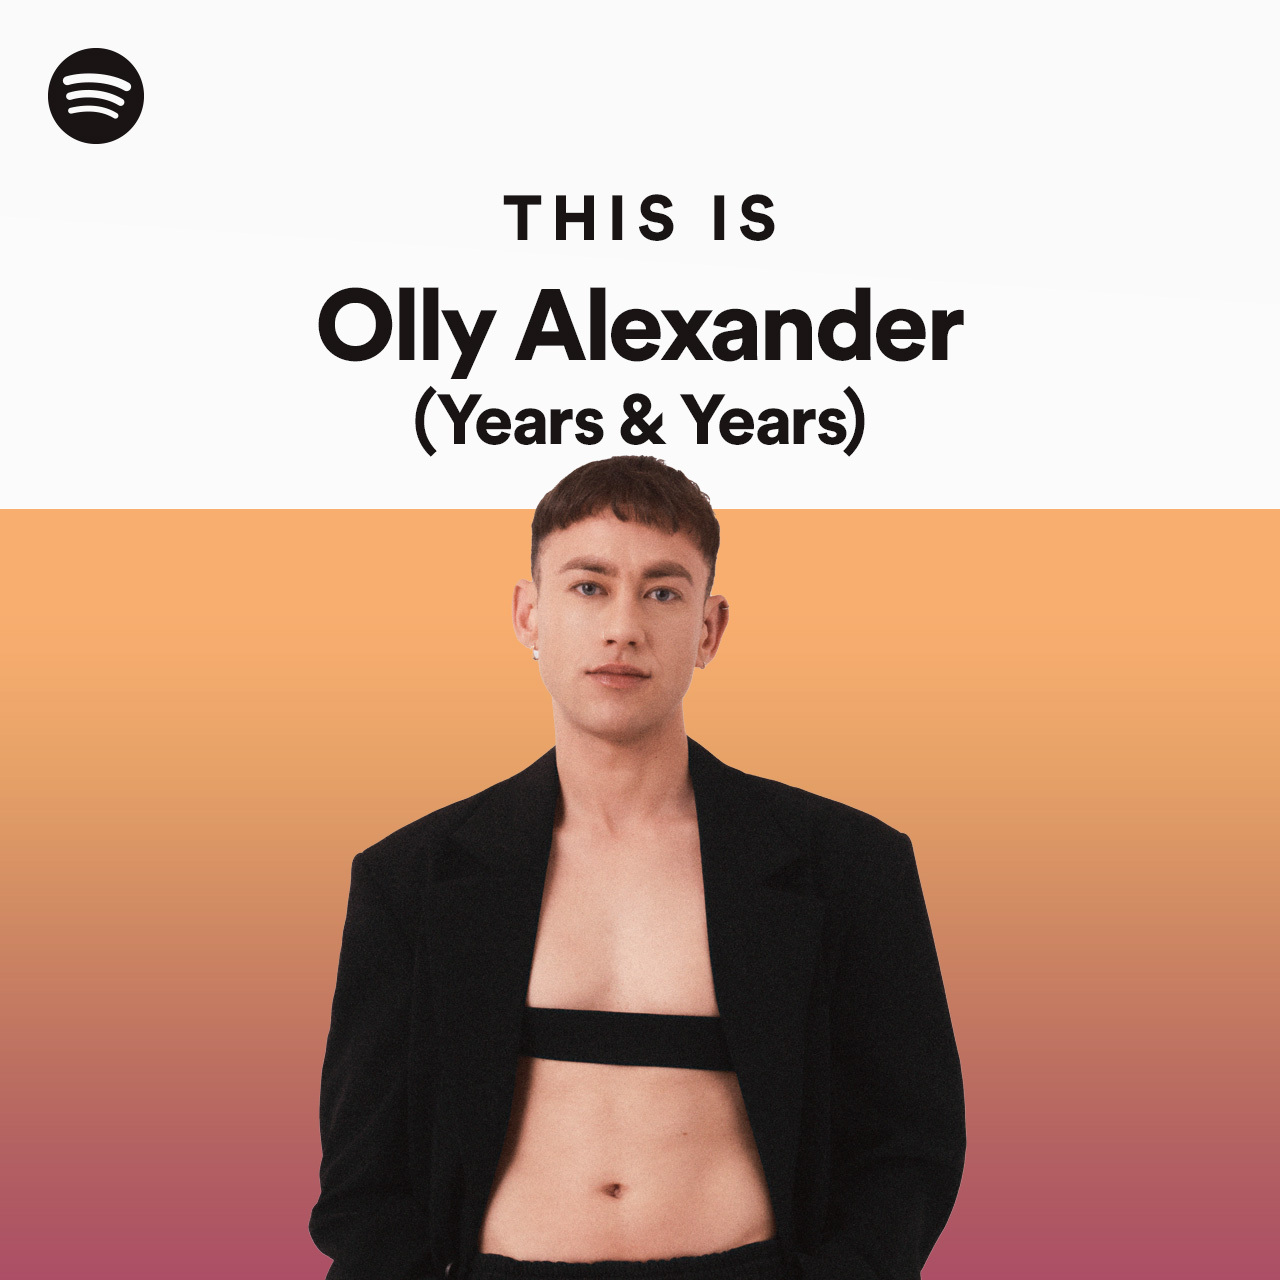 This Is Olly Alexander (Years & Years)